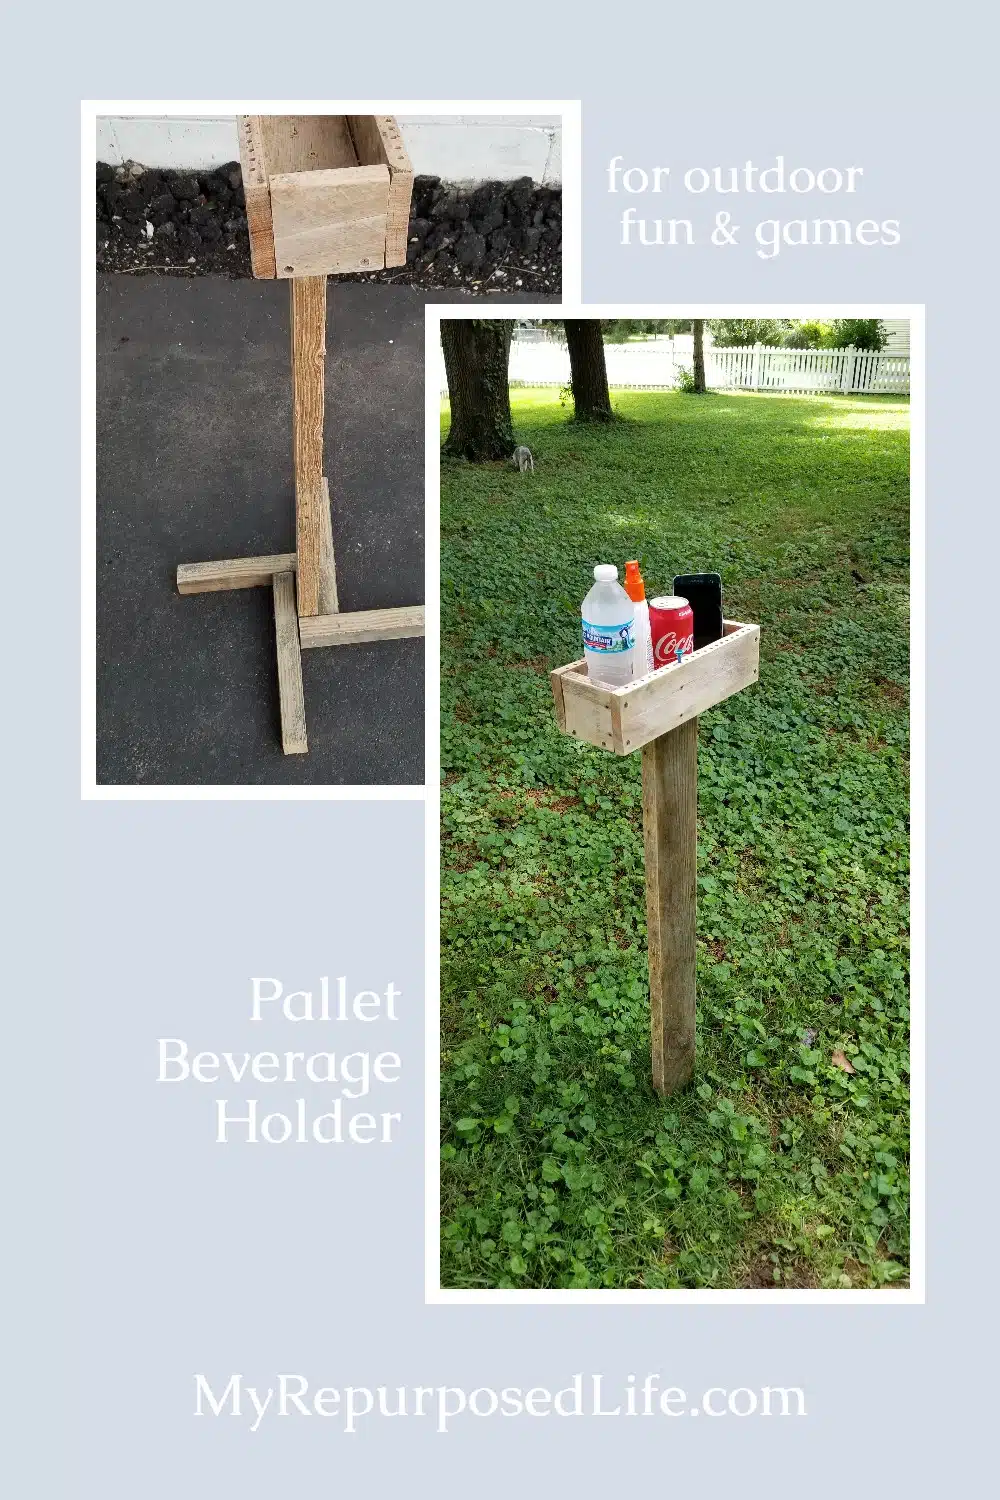 Make a beverage holder with score pegs for outdoor game play. Customize your beverage holder for the yard or on pavement for ping pong games in the garage. Step by step directions to complete this easy weekend project. via @repurposedlife